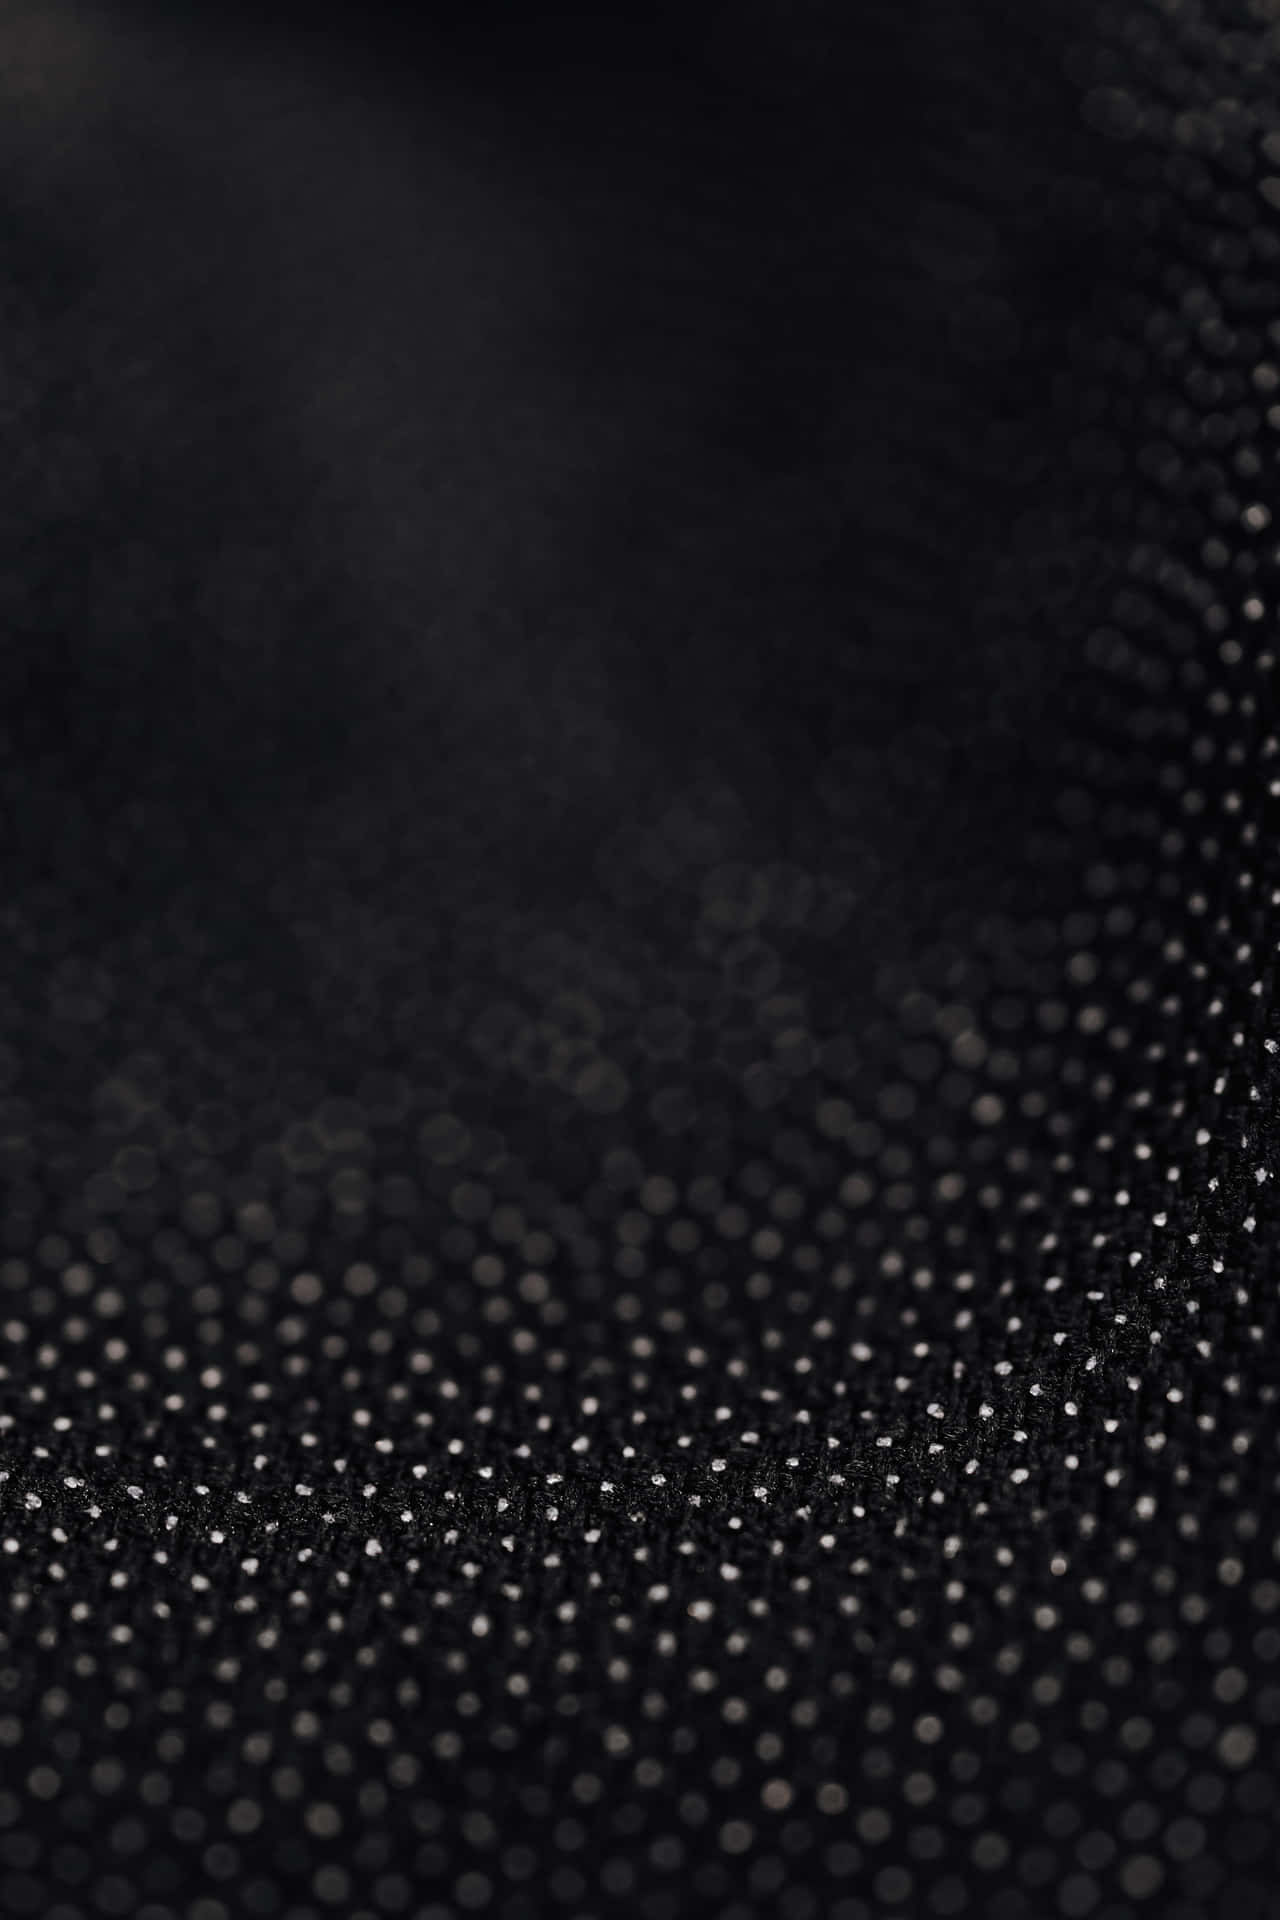 Black and White Dots Abstract Wallpaper Wallpaper